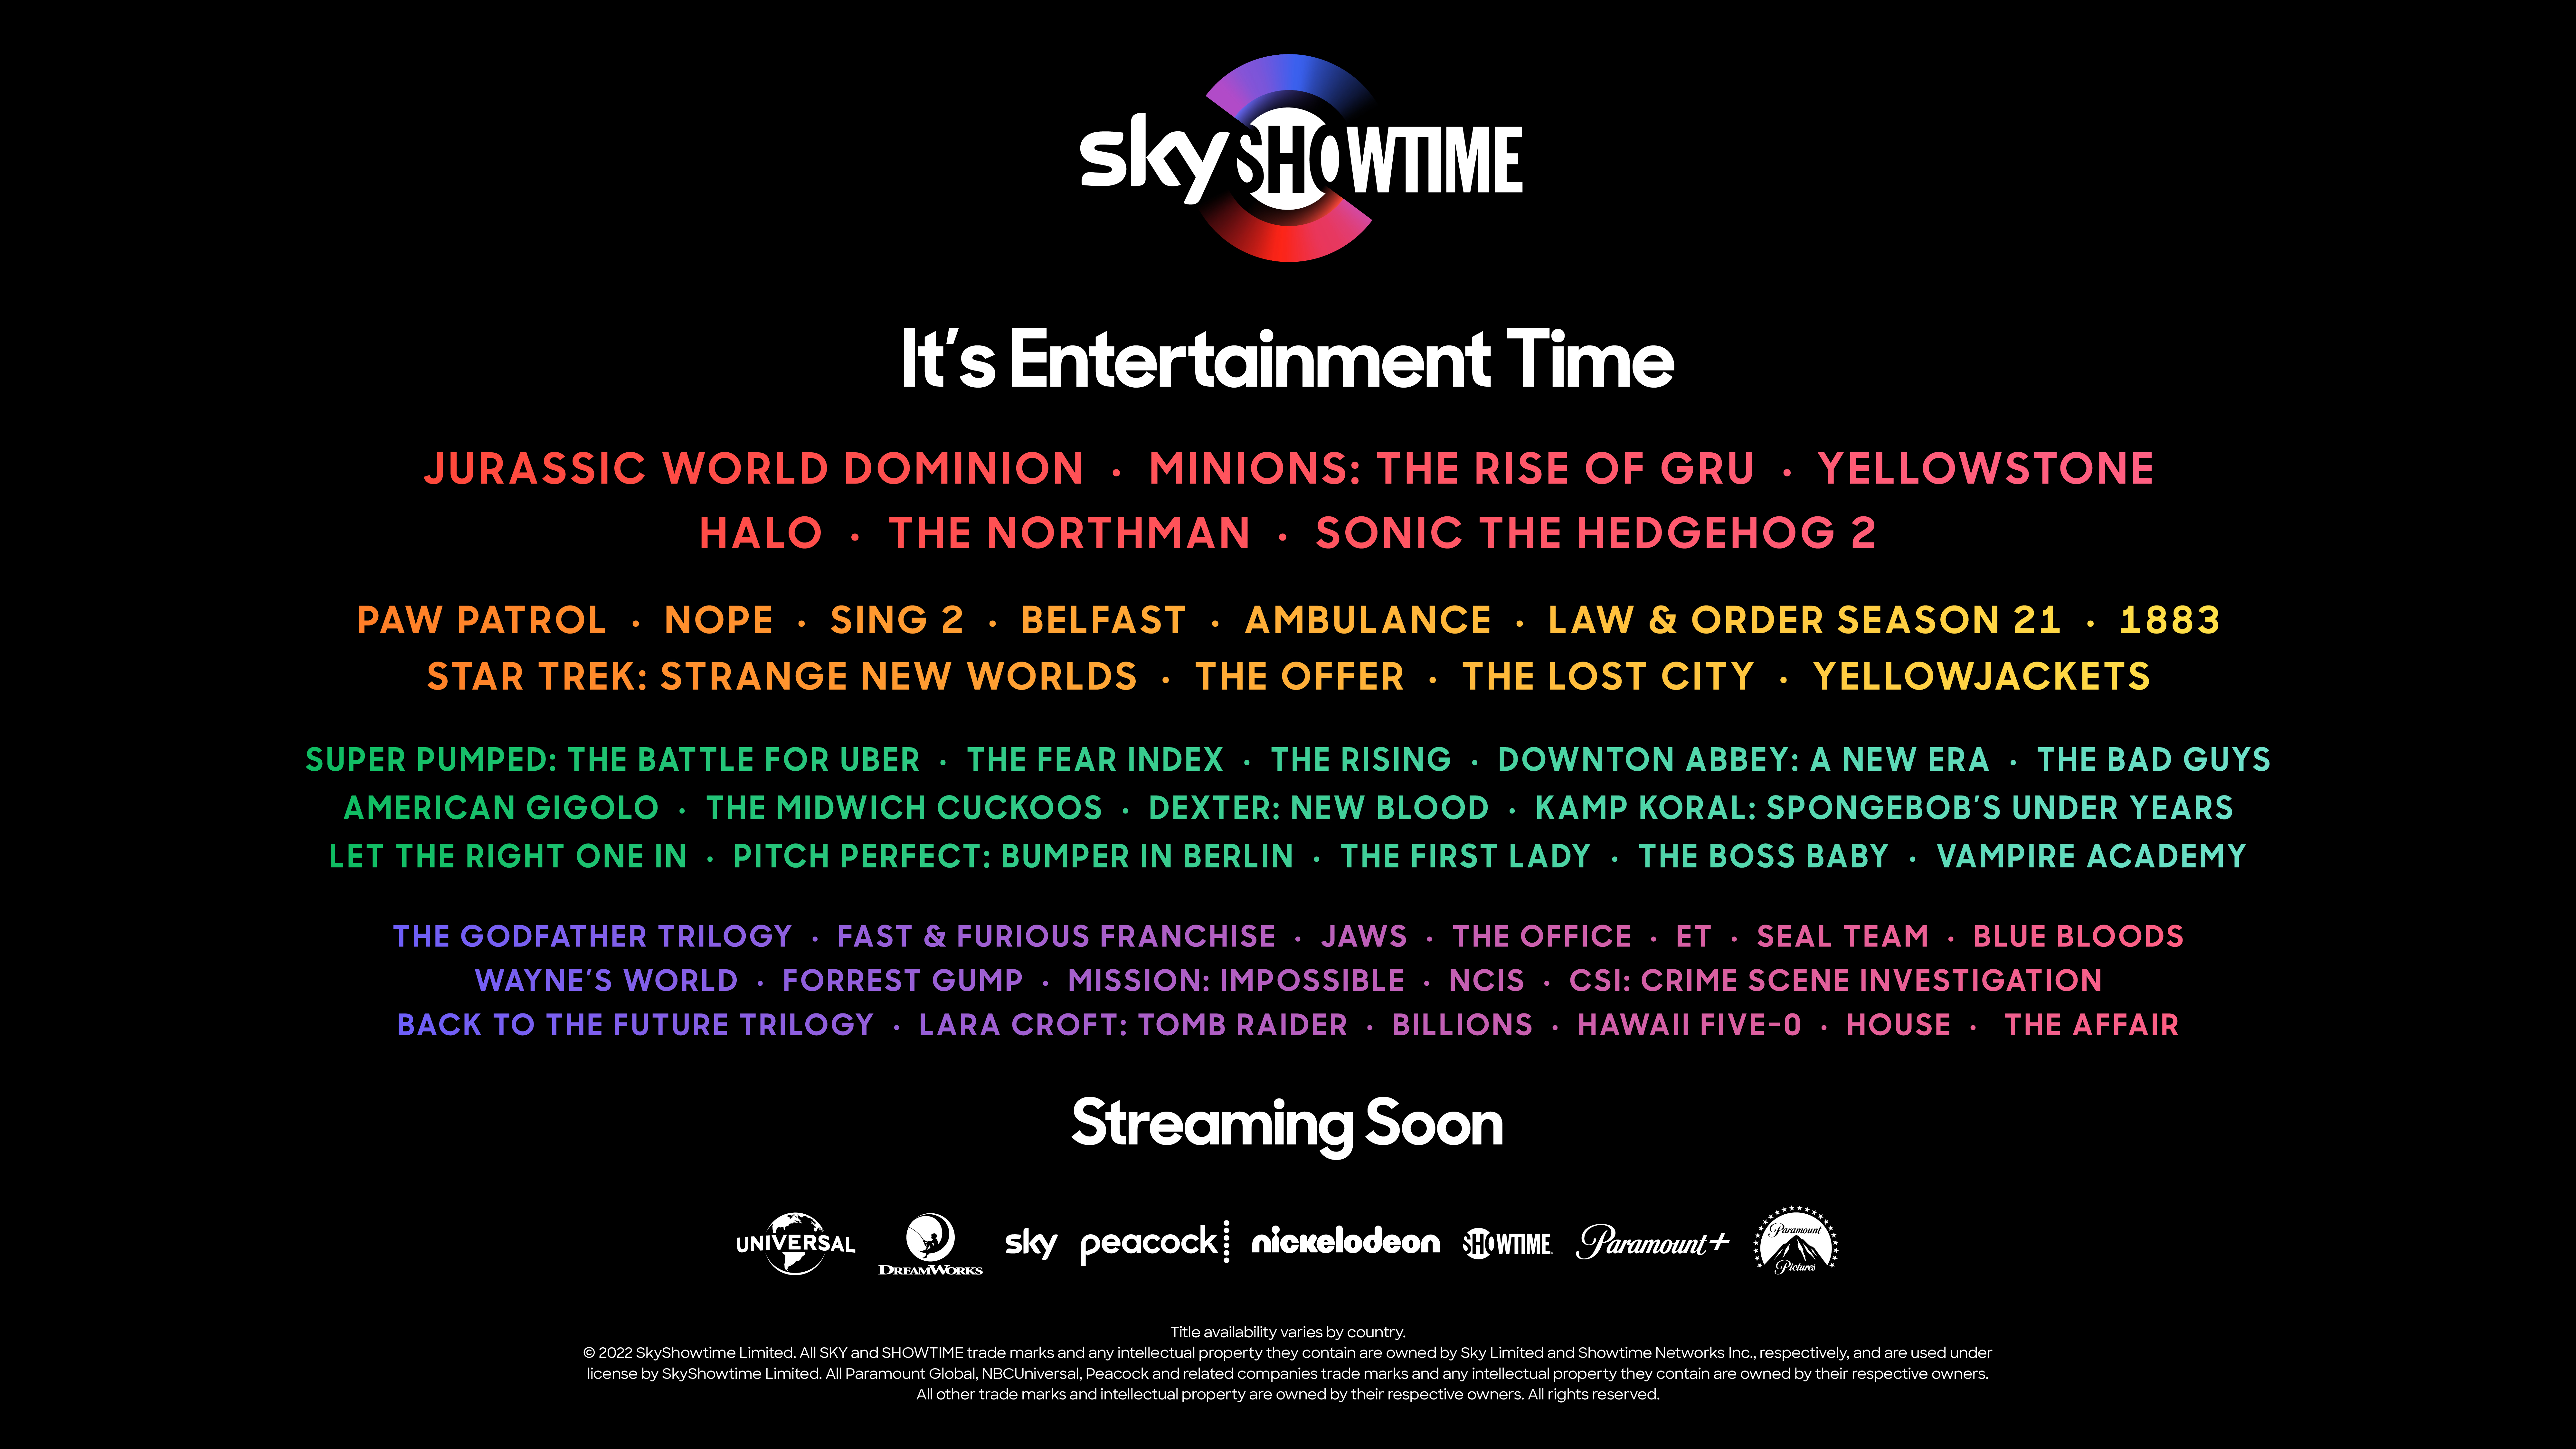 SkyShowtime announces big line-up of new hit movies and exclusive series  arriving later this year and into 2024